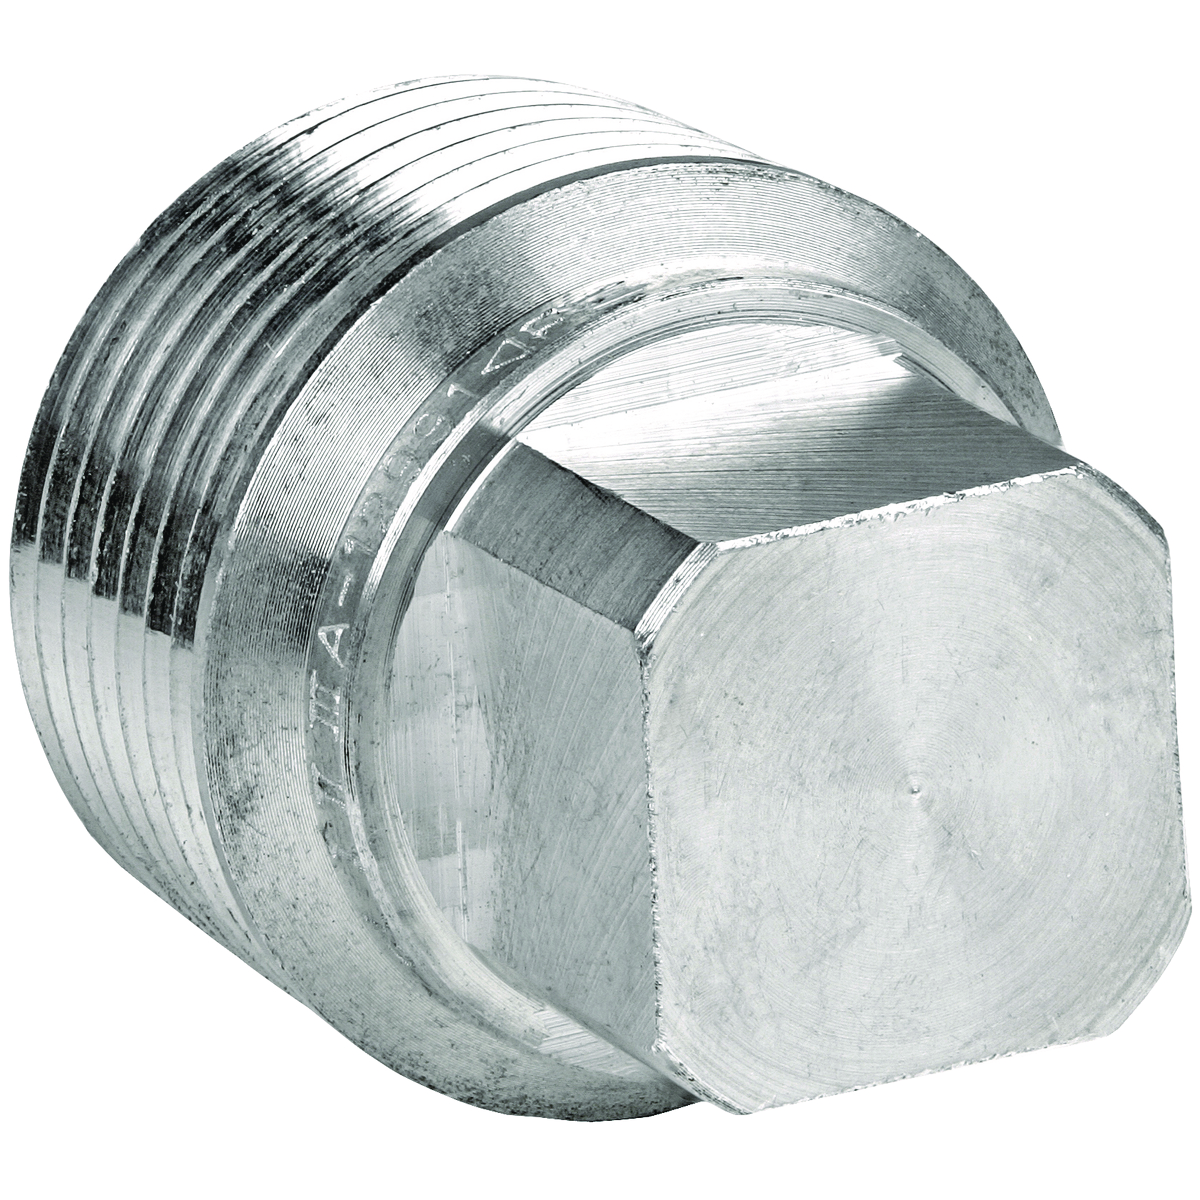 CUP SERIES FITTINGS - ALUMINUM - SQUARE HEADED PLUG - HUB SIZE 1 IN